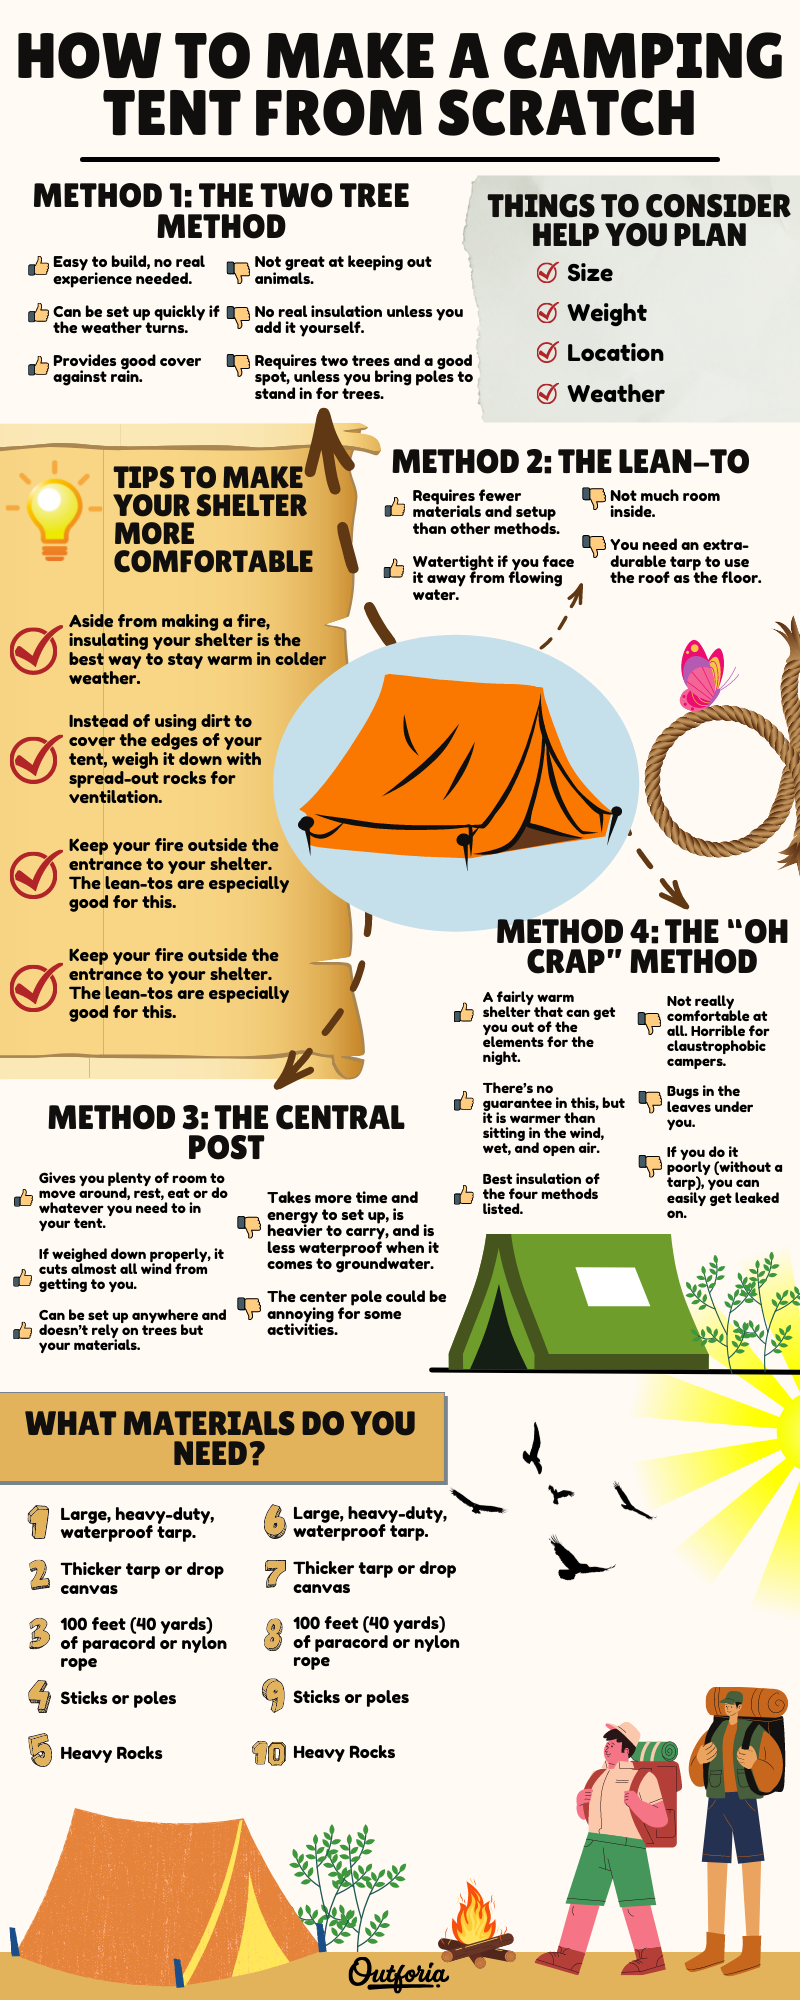 How to make a camping tent from scratch step by step guide and chart